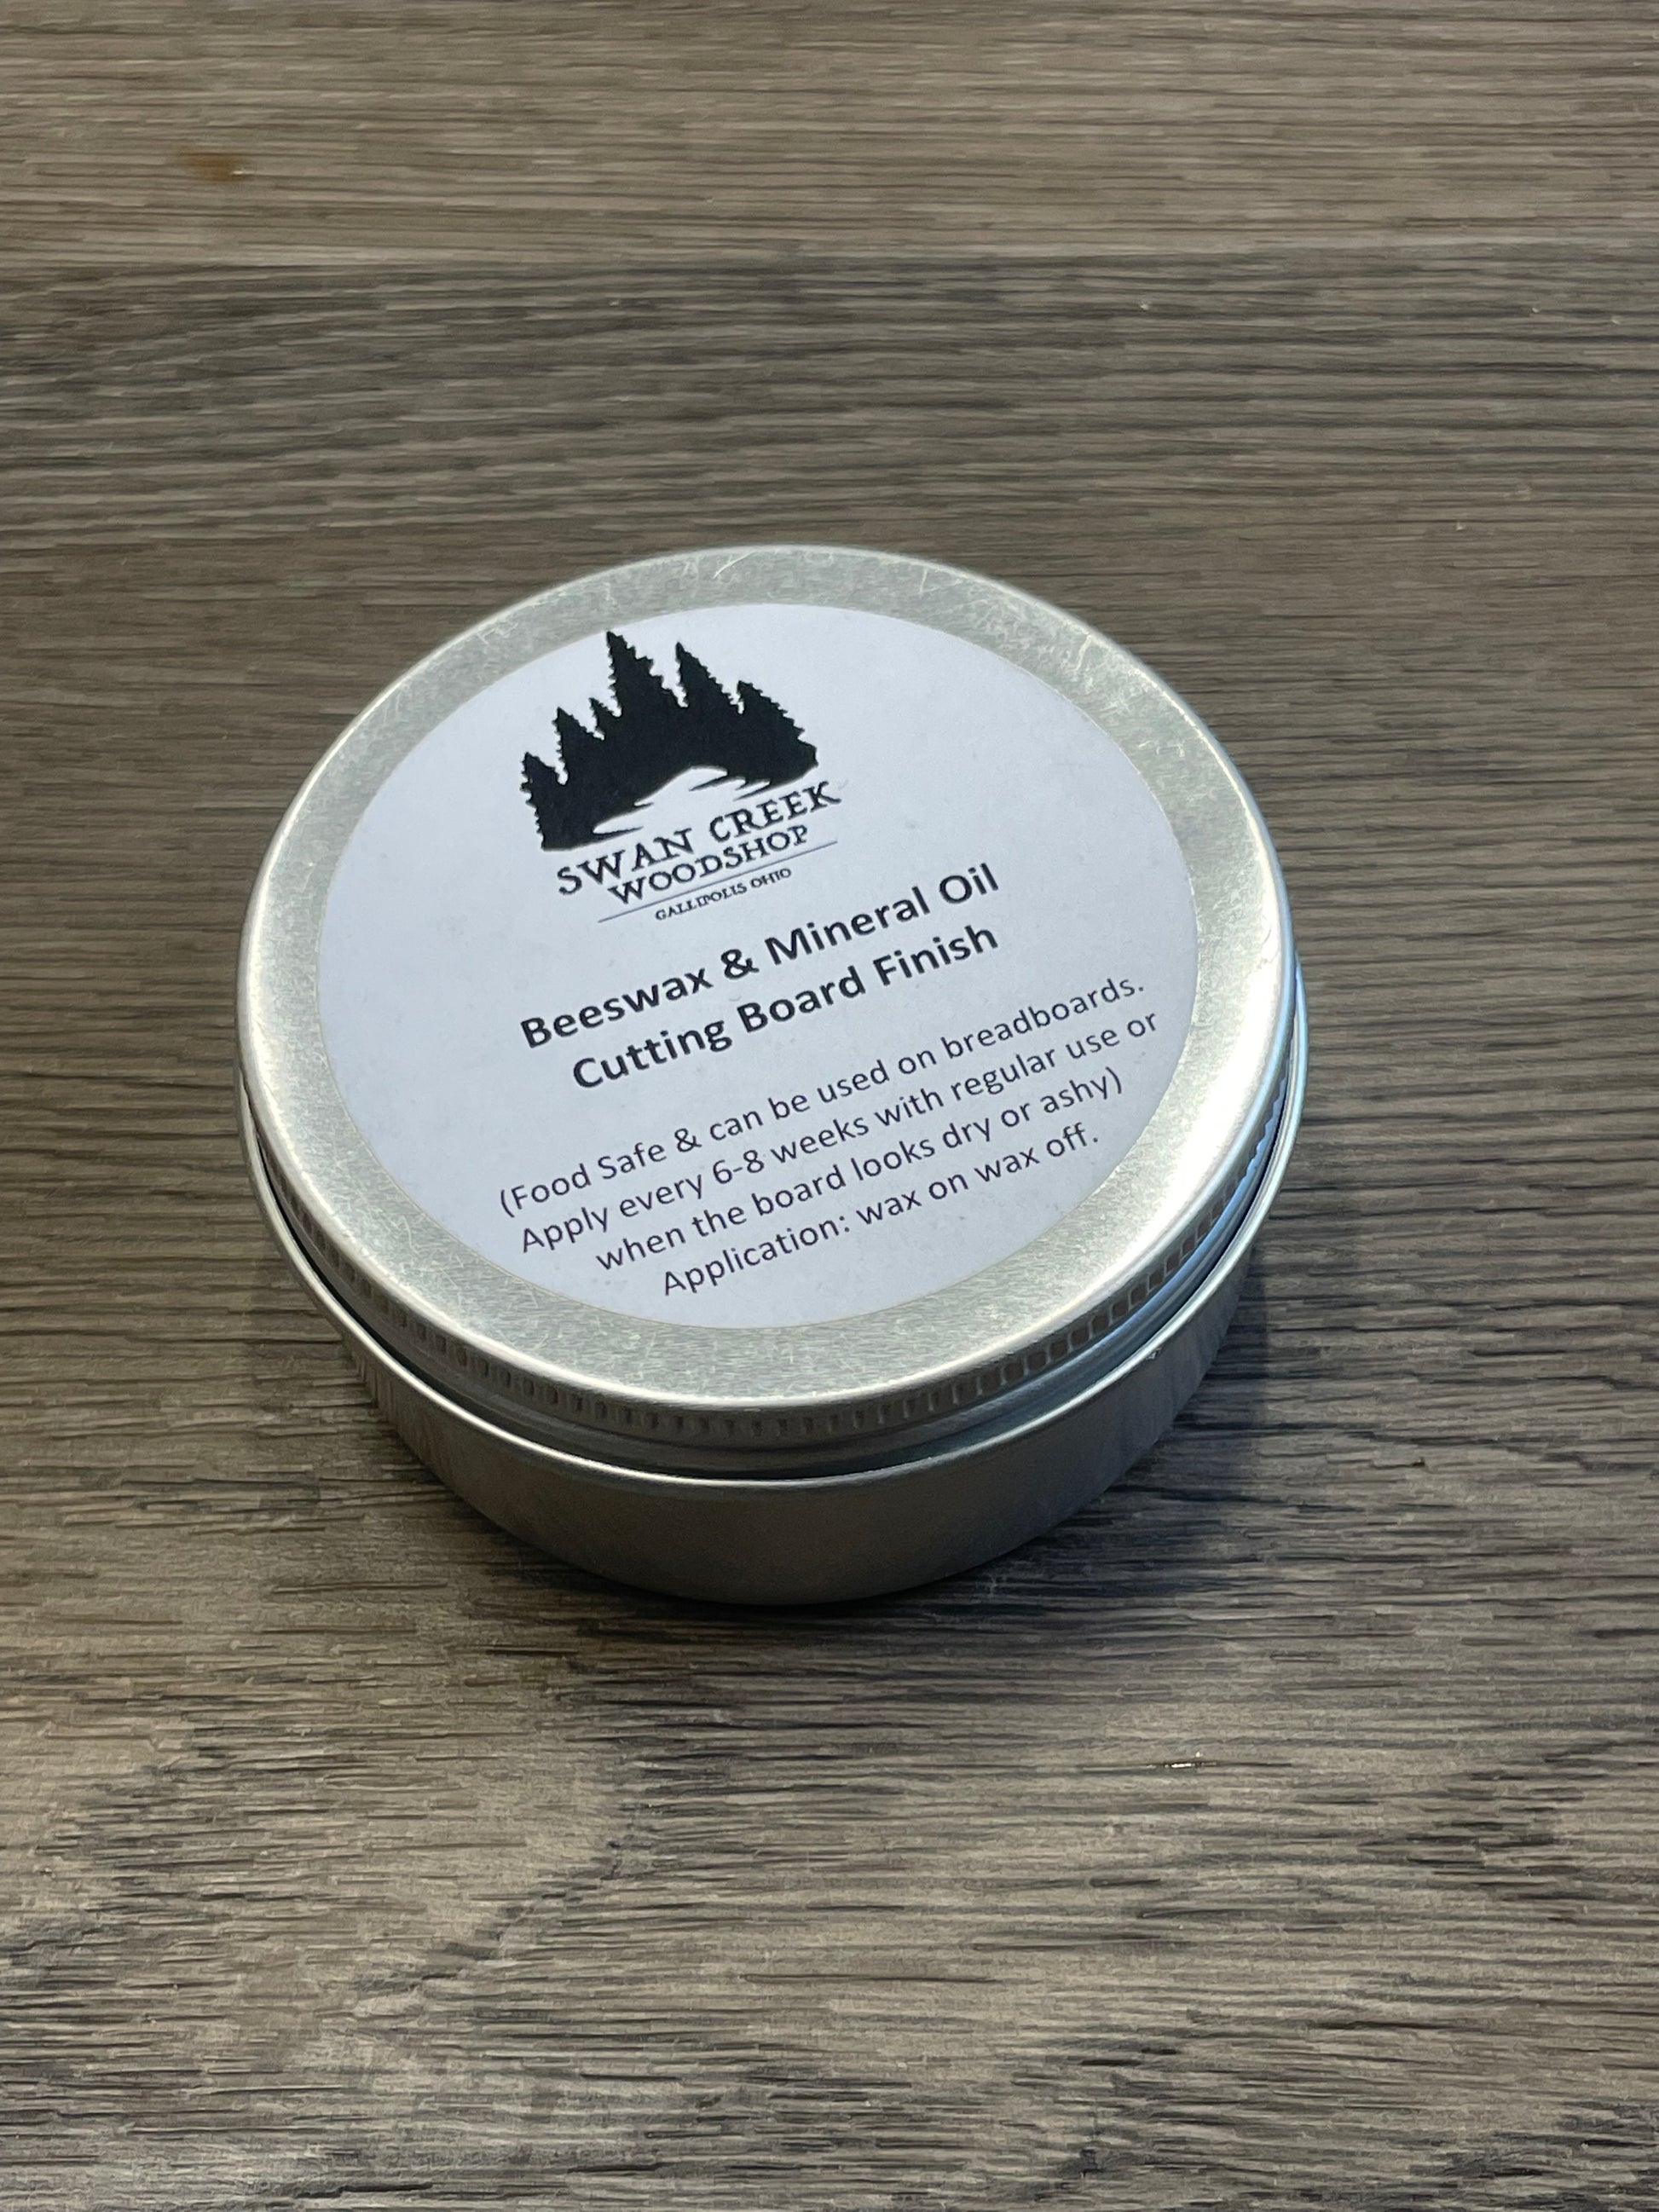 Cutting Board Wax – Made By Bees